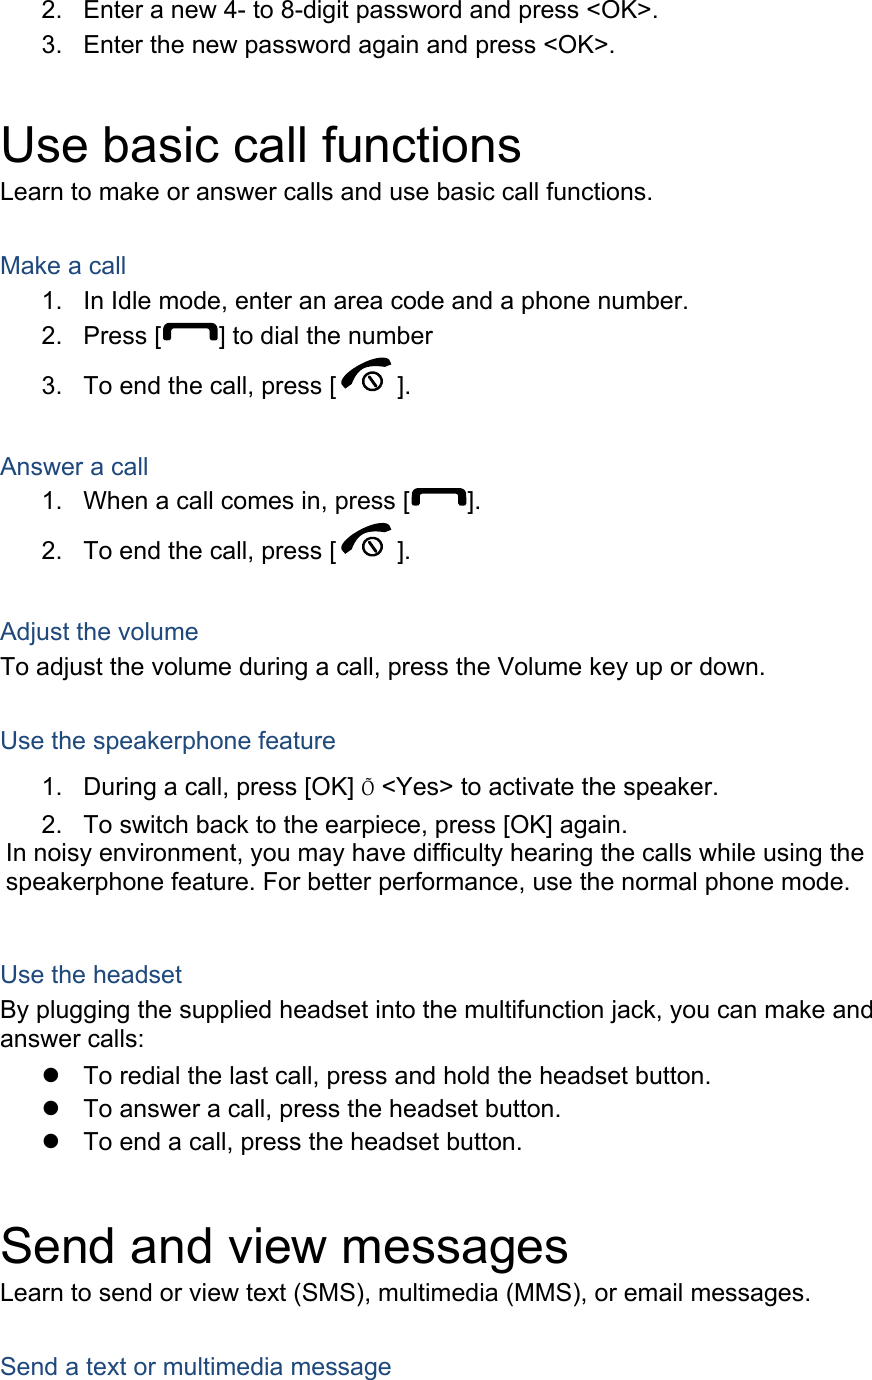 2.  Enter a new 4- to 8-digit password and press &lt;OK&gt;. 3.  Enter the new password again and press &lt;OK&gt;.  Use basic call functions Learn to make or answer calls and use basic call functions.  Make a call 1.  In Idle mode, enter an area code and a phone number. 2. Press [ ] to dial the number 3.  To end the call, press [ ].   Answer a call 1.  When a call comes in, press [ ]. 2.  To end the call, press [ ].  Adjust the volume To adjust the volume during a call, press the Volume key up or down.  Use the speakerphone feature 1.  During a call, press [OK] Õ &lt;Yes&gt; to activate the speaker. 2.  To switch back to the earpiece, press [OK] again. In noisy environment, you may have difficulty hearing the calls while using the speakerphone feature. For better performance, use the normal phone mode.  Use the headset By plugging the supplied headset into the multifunction jack, you can make and answer calls:   To redial the last call, press and hold the headset button.   To answer a call, press the headset button.   To end a call, press the headset button.  Send and view messages Learn to send or view text (SMS), multimedia (MMS), or email messages.  Send a text or multimedia message 